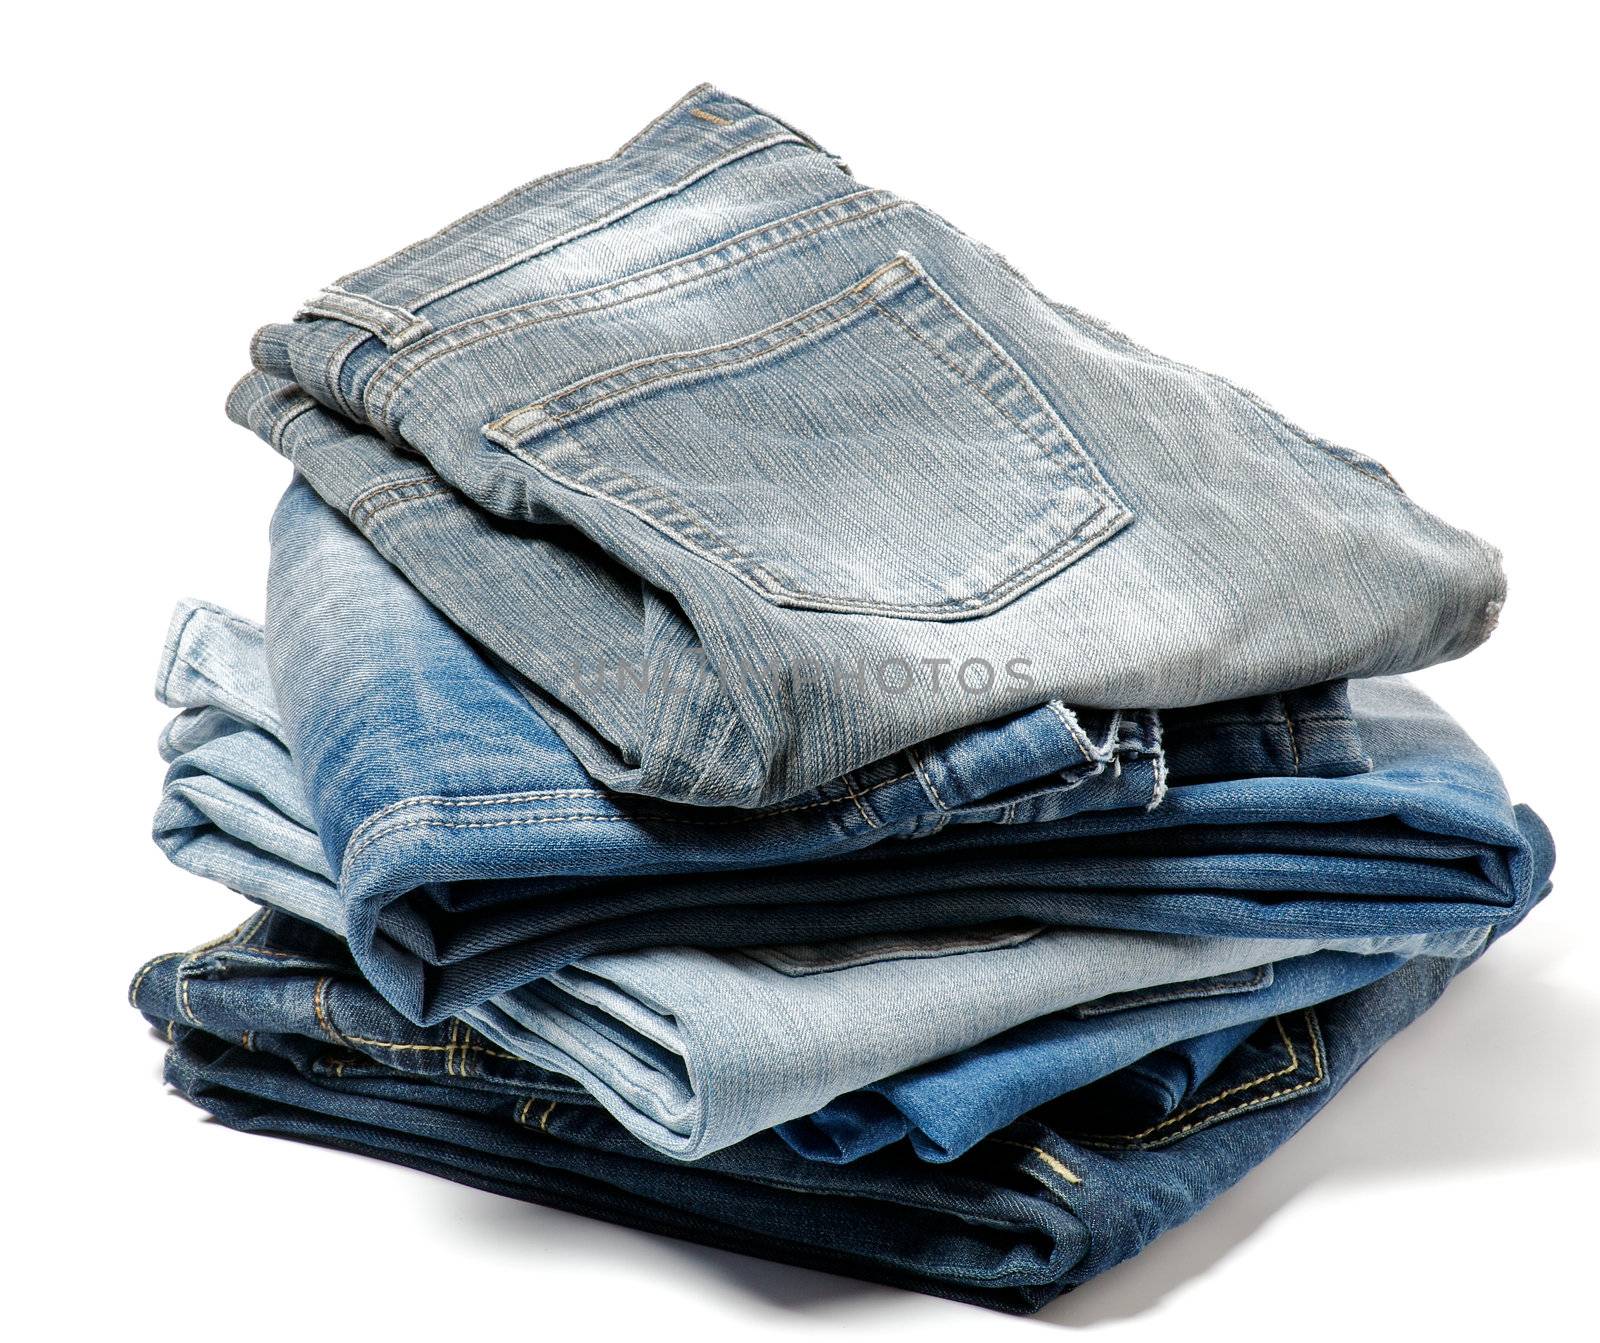 Stack of Folded Old Jeans by zhekos